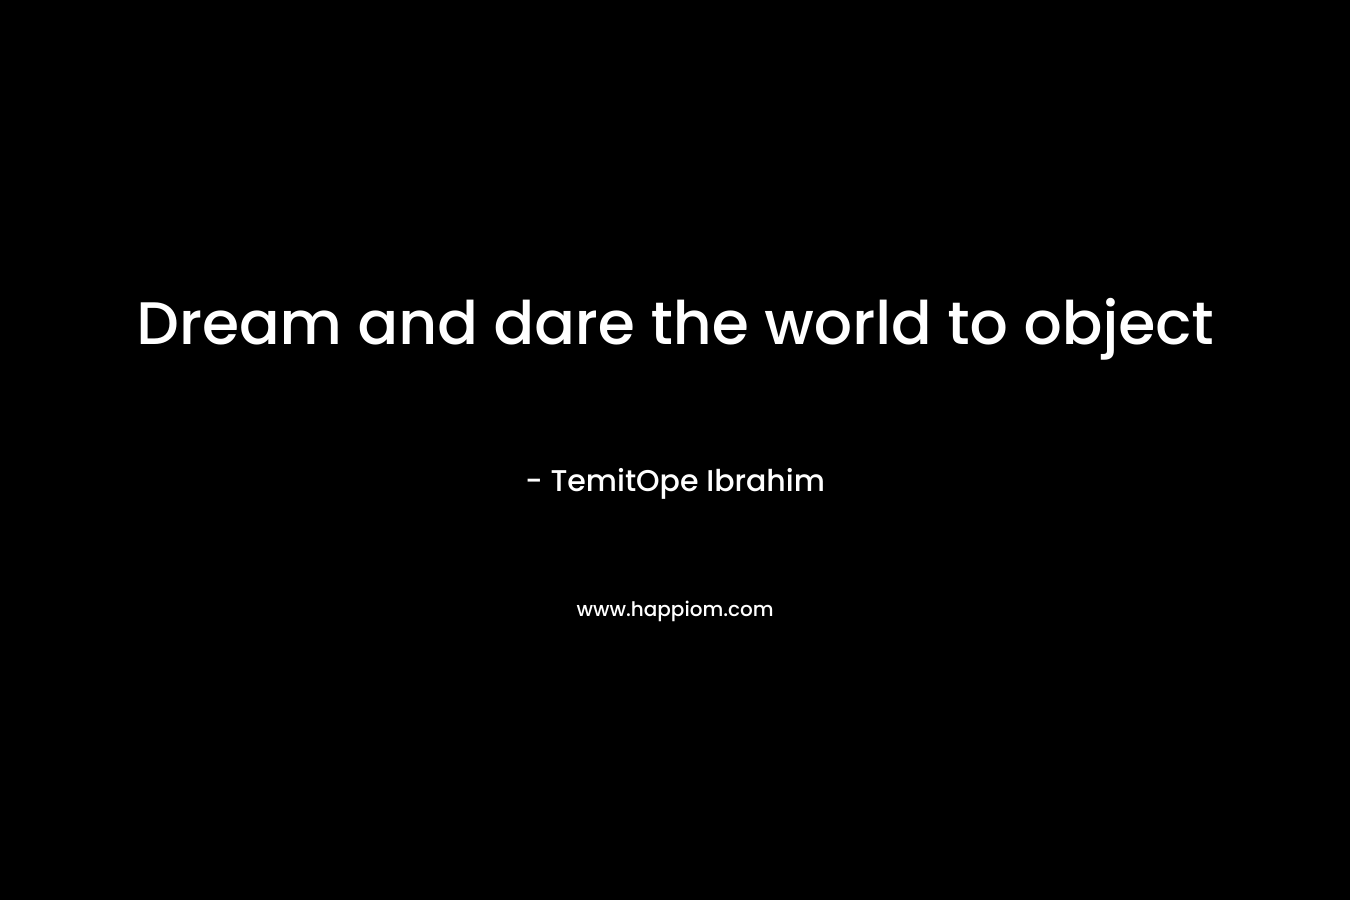 Dream and dare the world to object